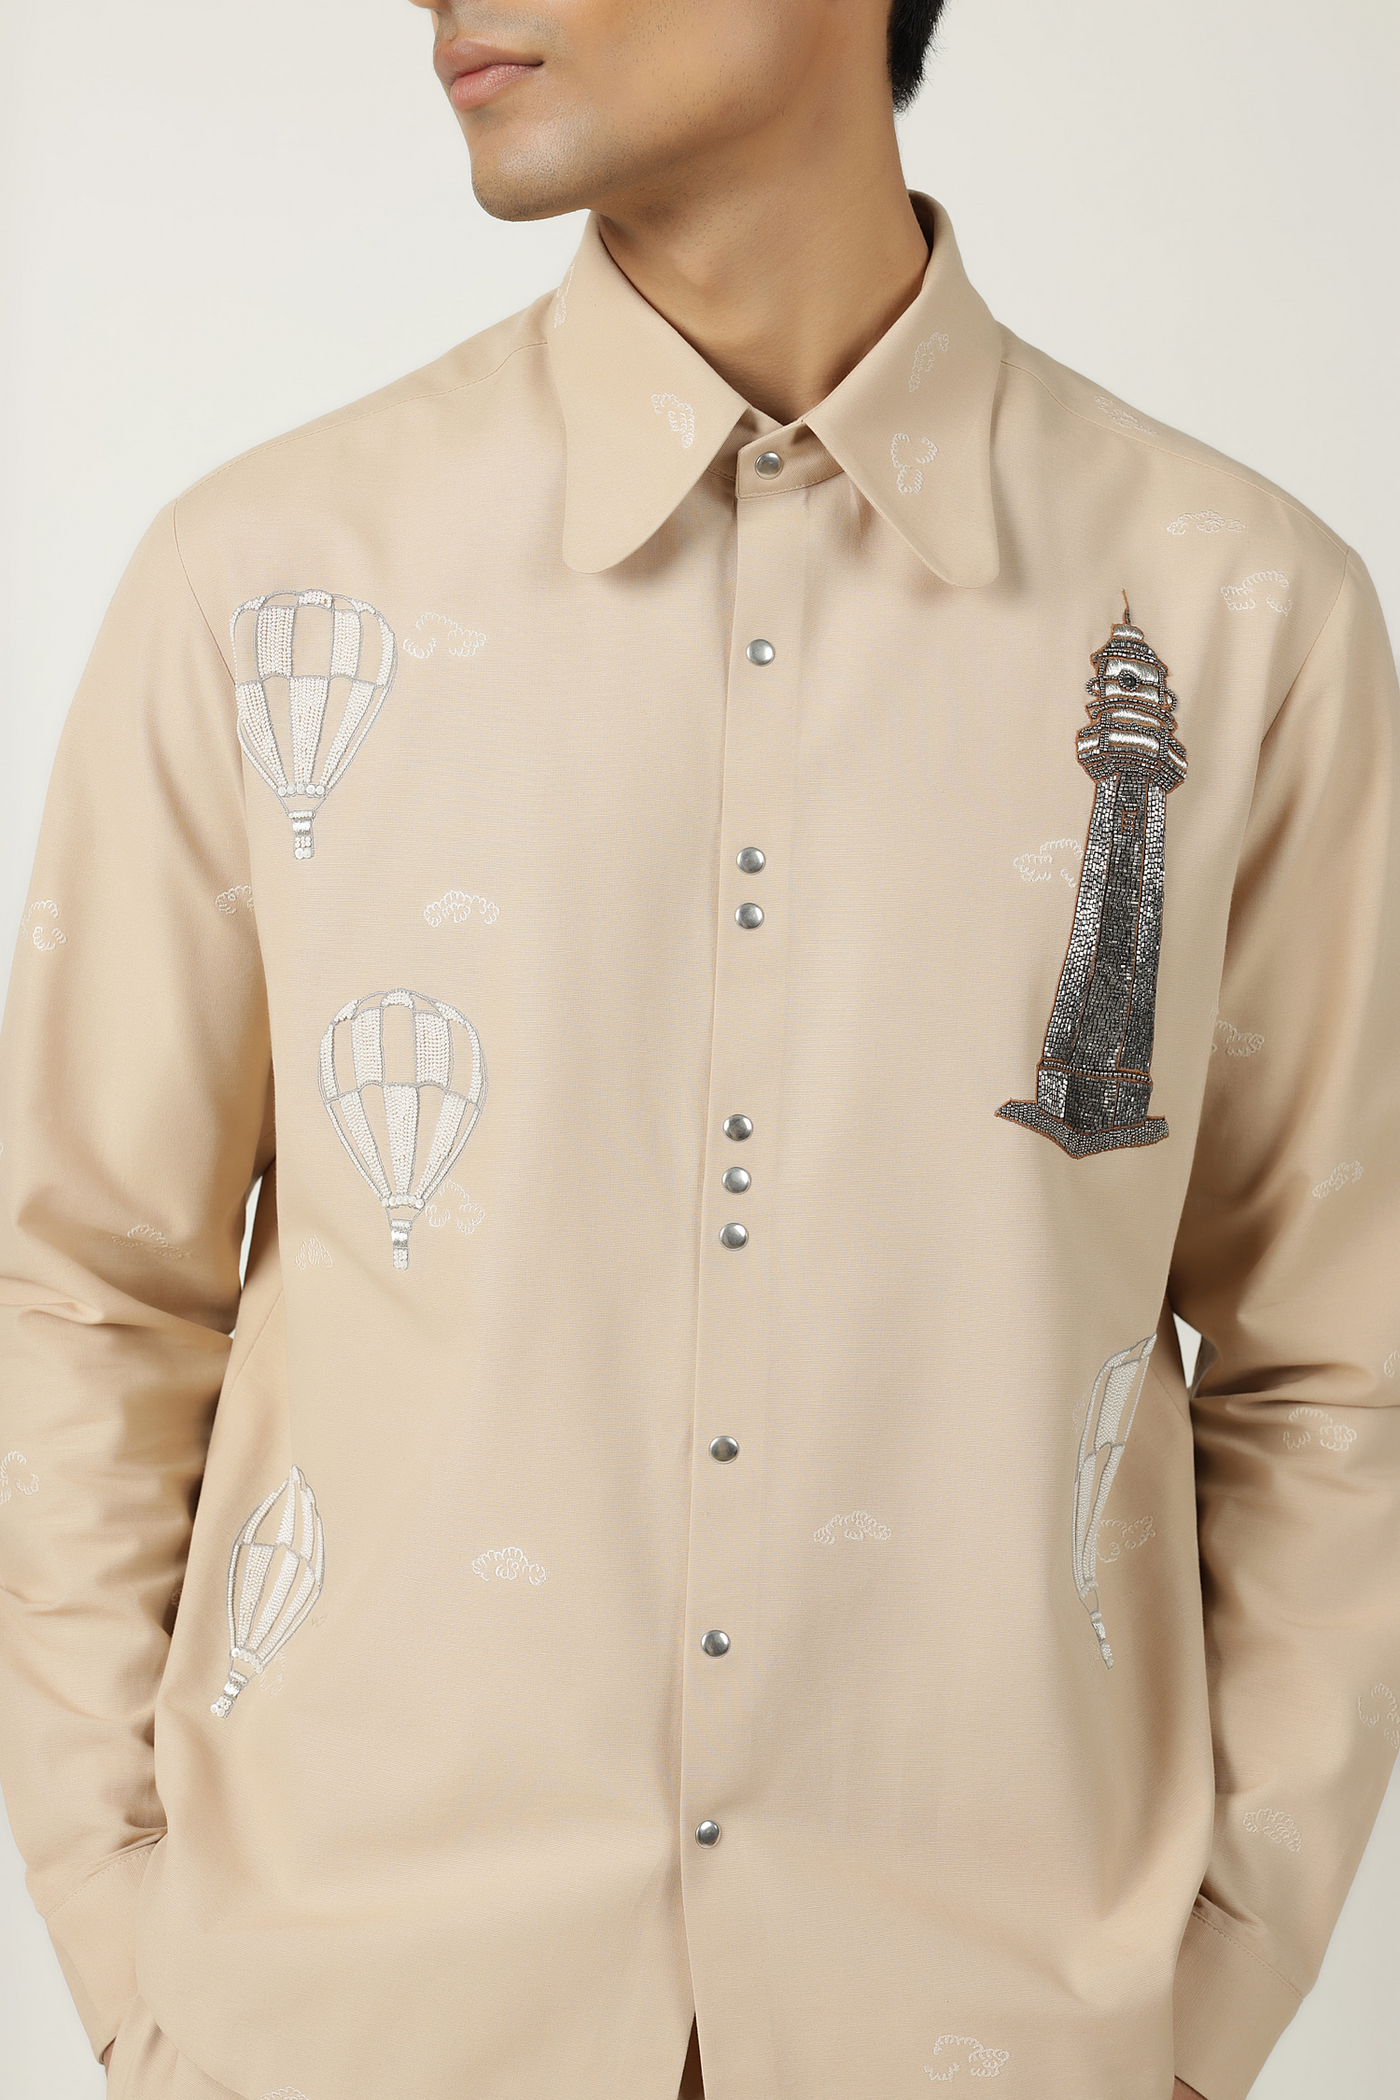 Lighthouse, Airballoons & Clouds Shirt